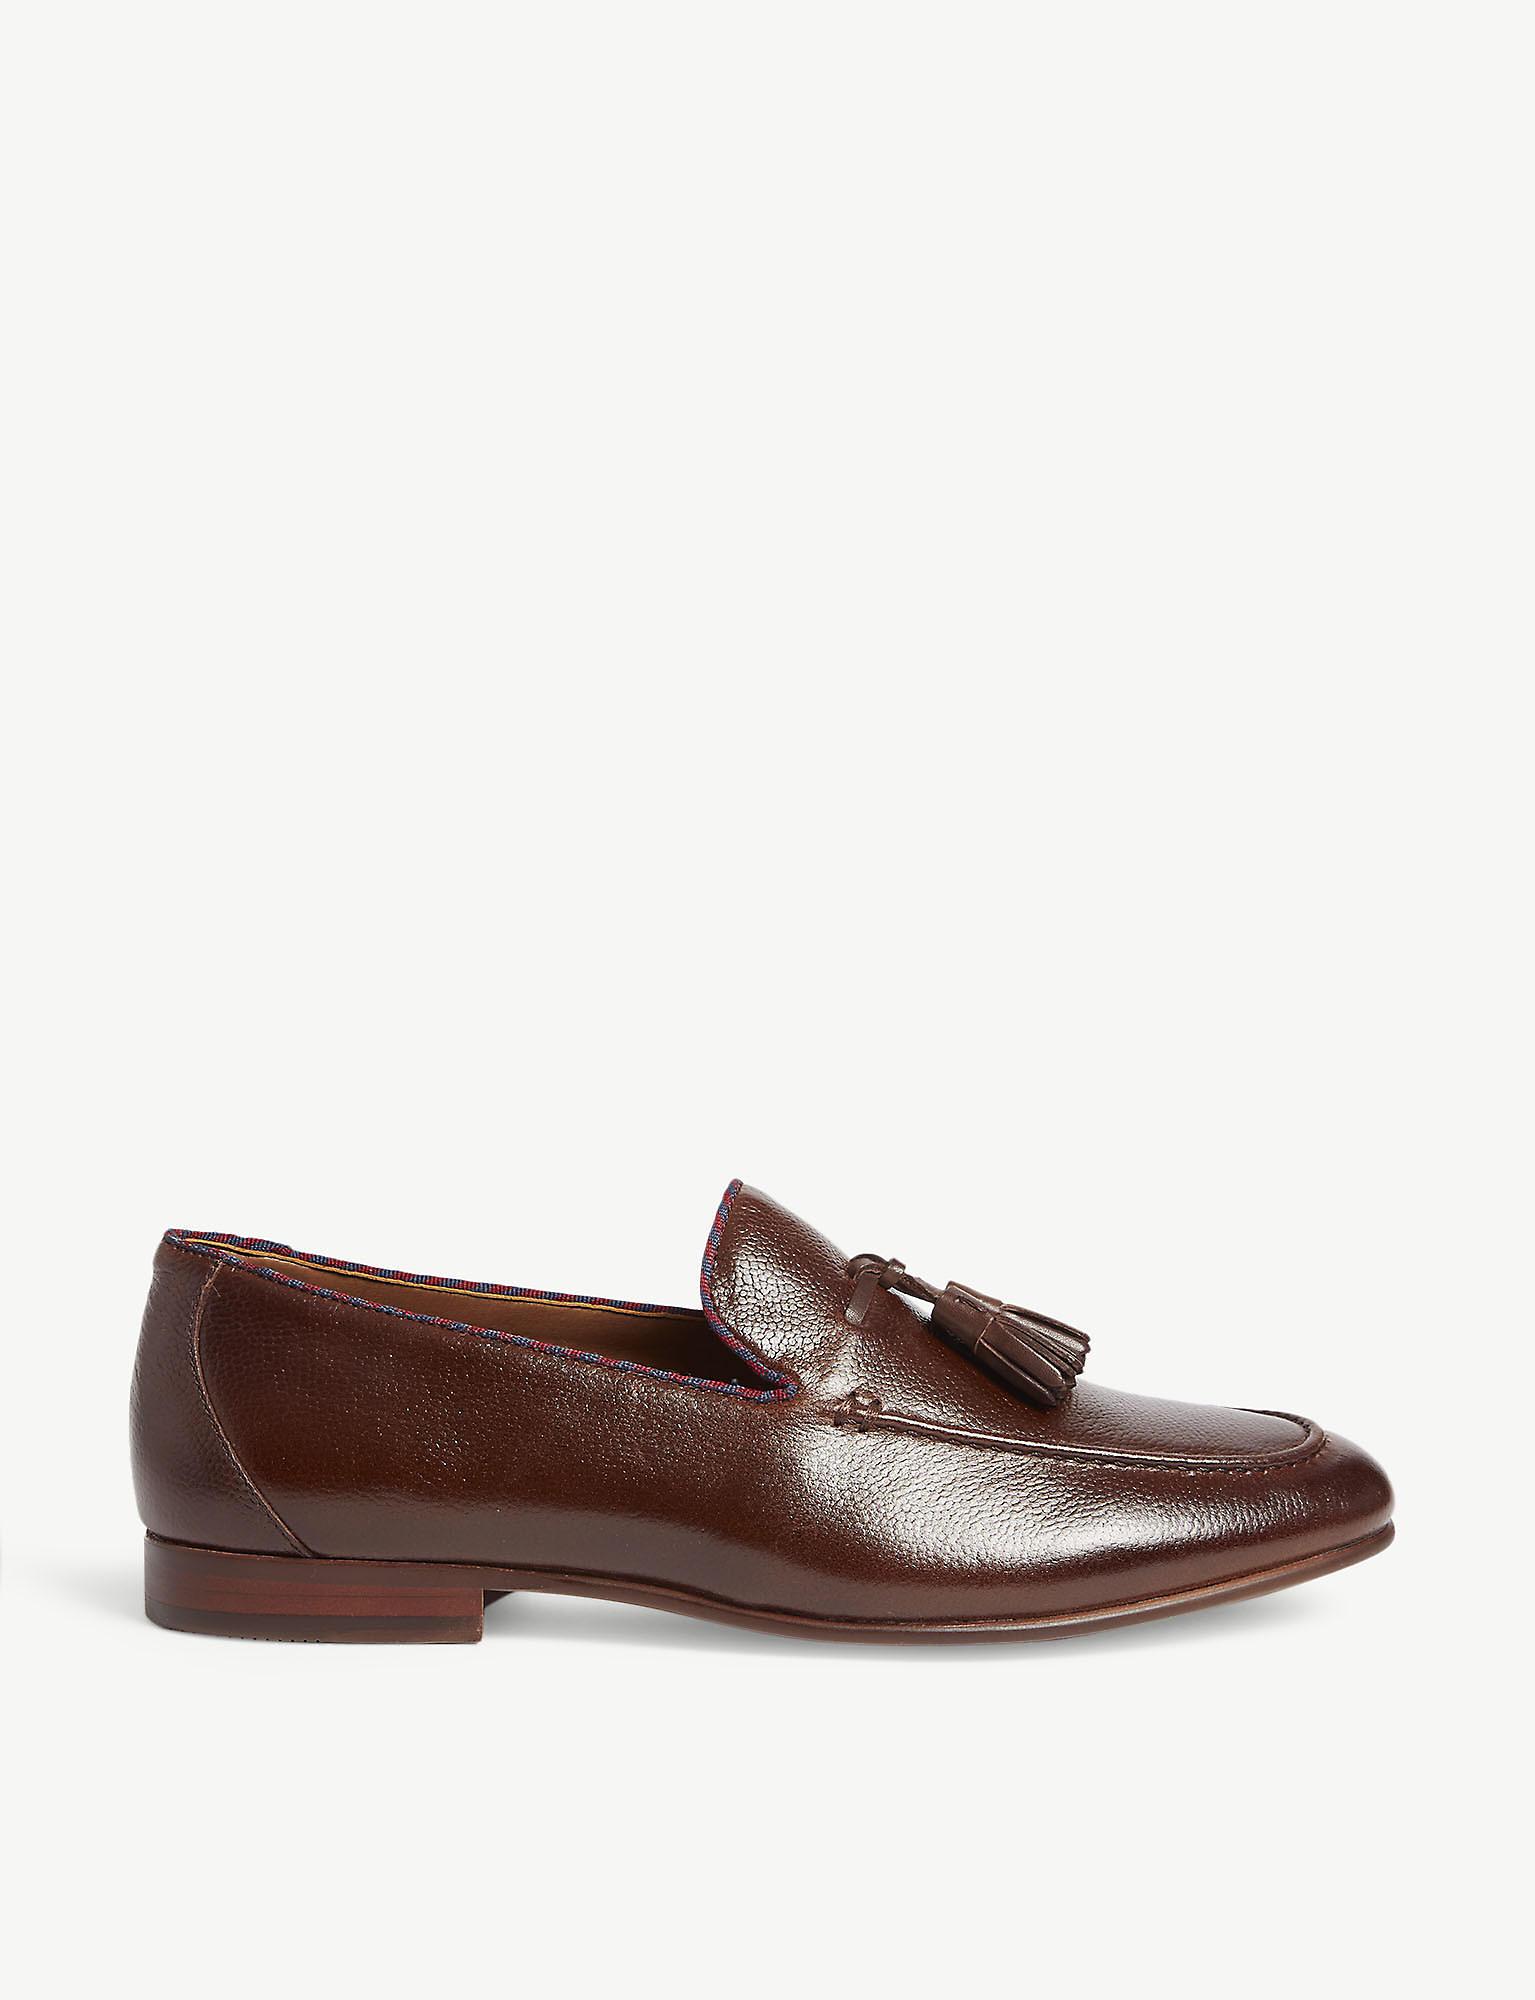 ALDO Wyanet Leather Loafers in Dark Brown (Brown) for Men - Lyst